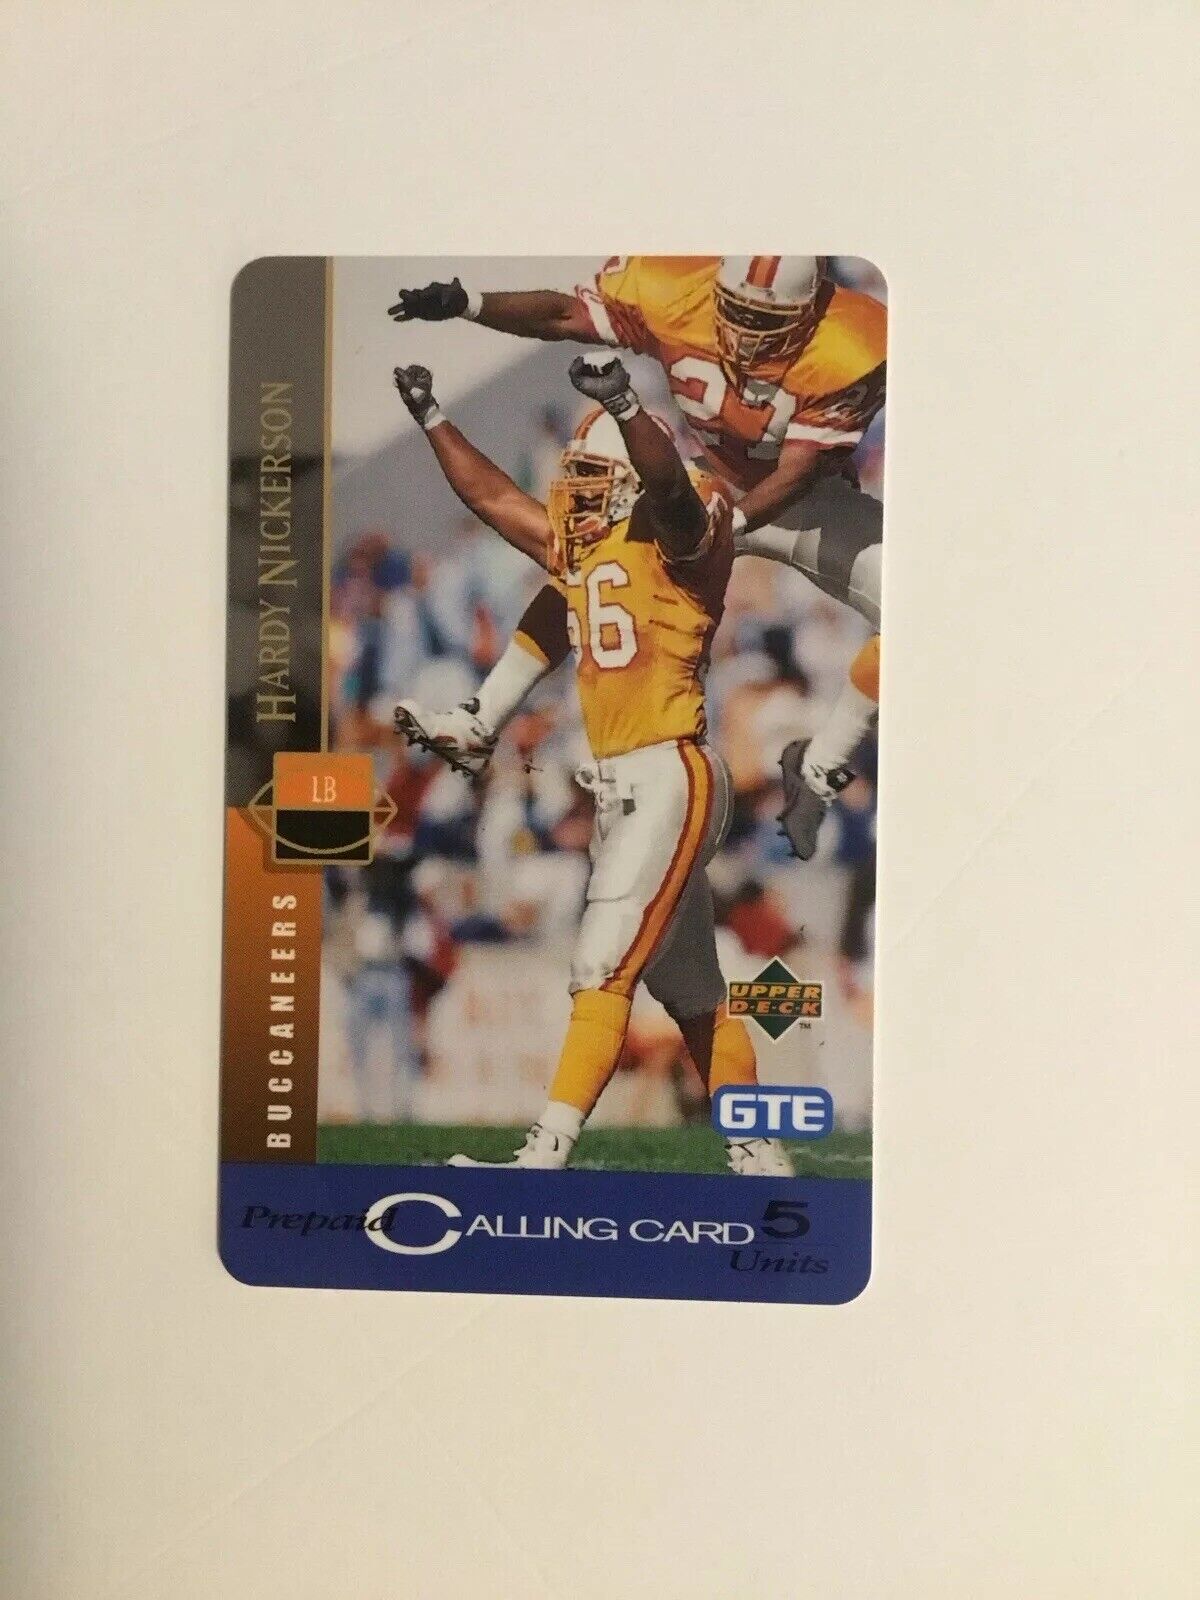 1994 Upper Deck NFC Phone Card Featuring Hardy Nickerson GTE